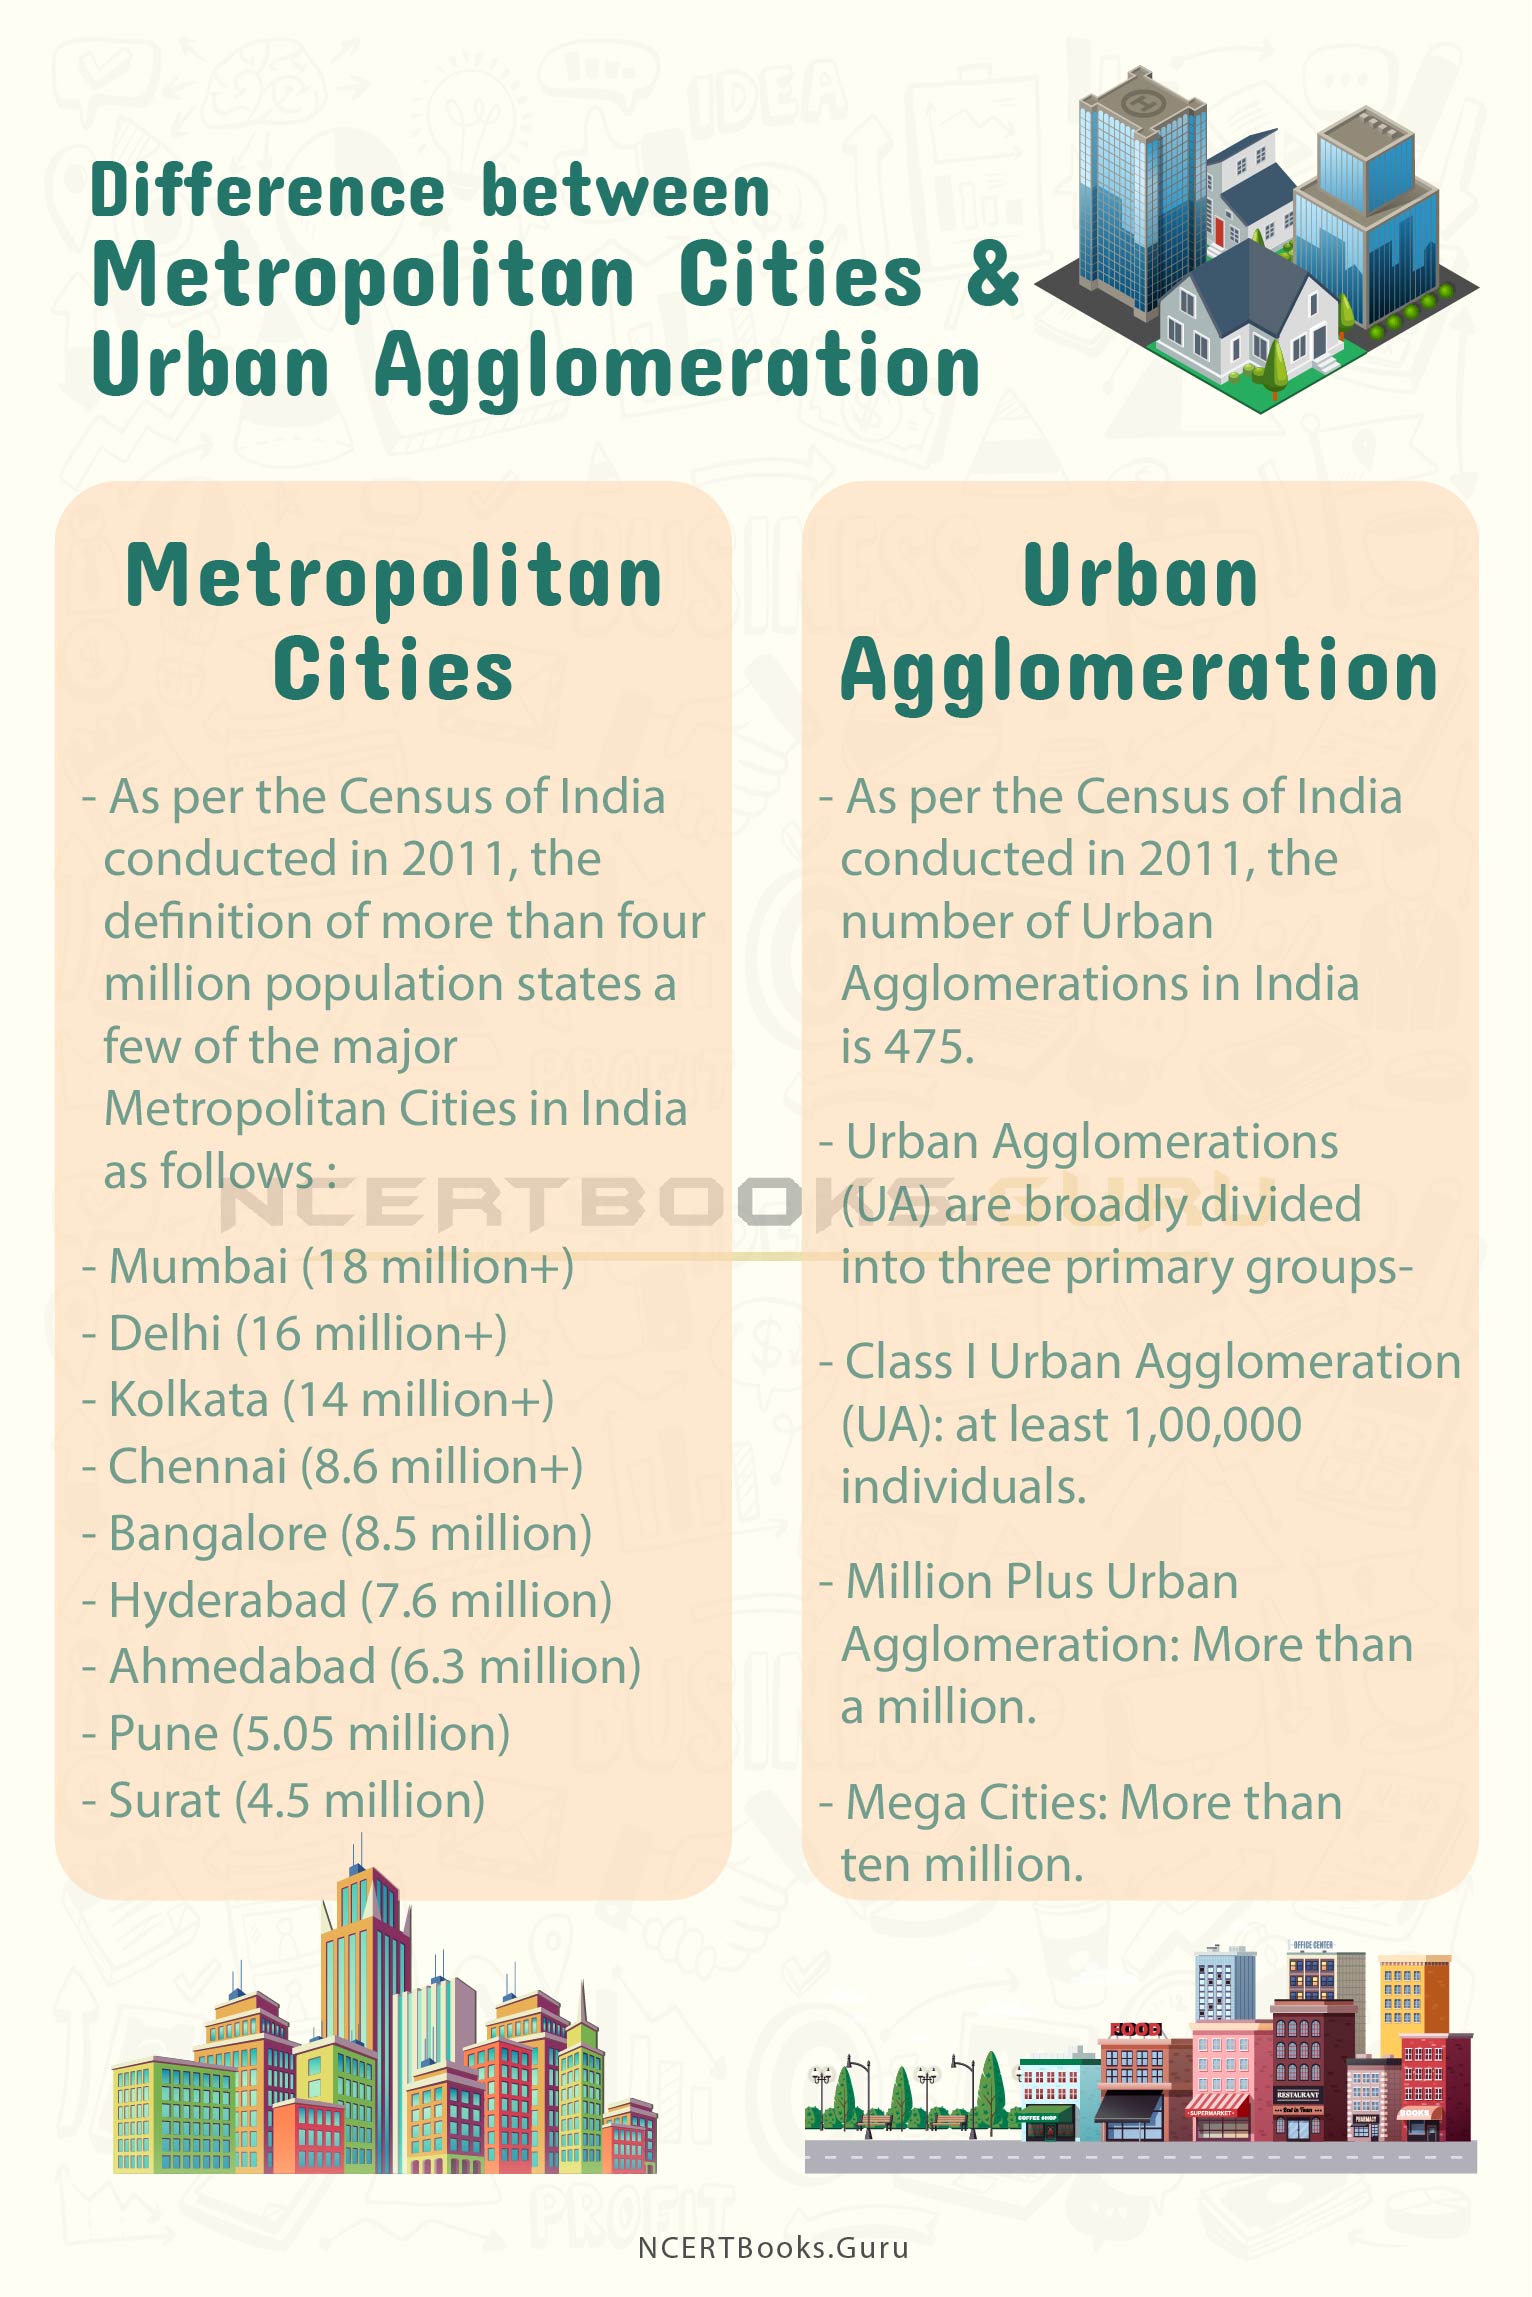 Difference Between Metropolitan Cities and Urban Agglomeration 2